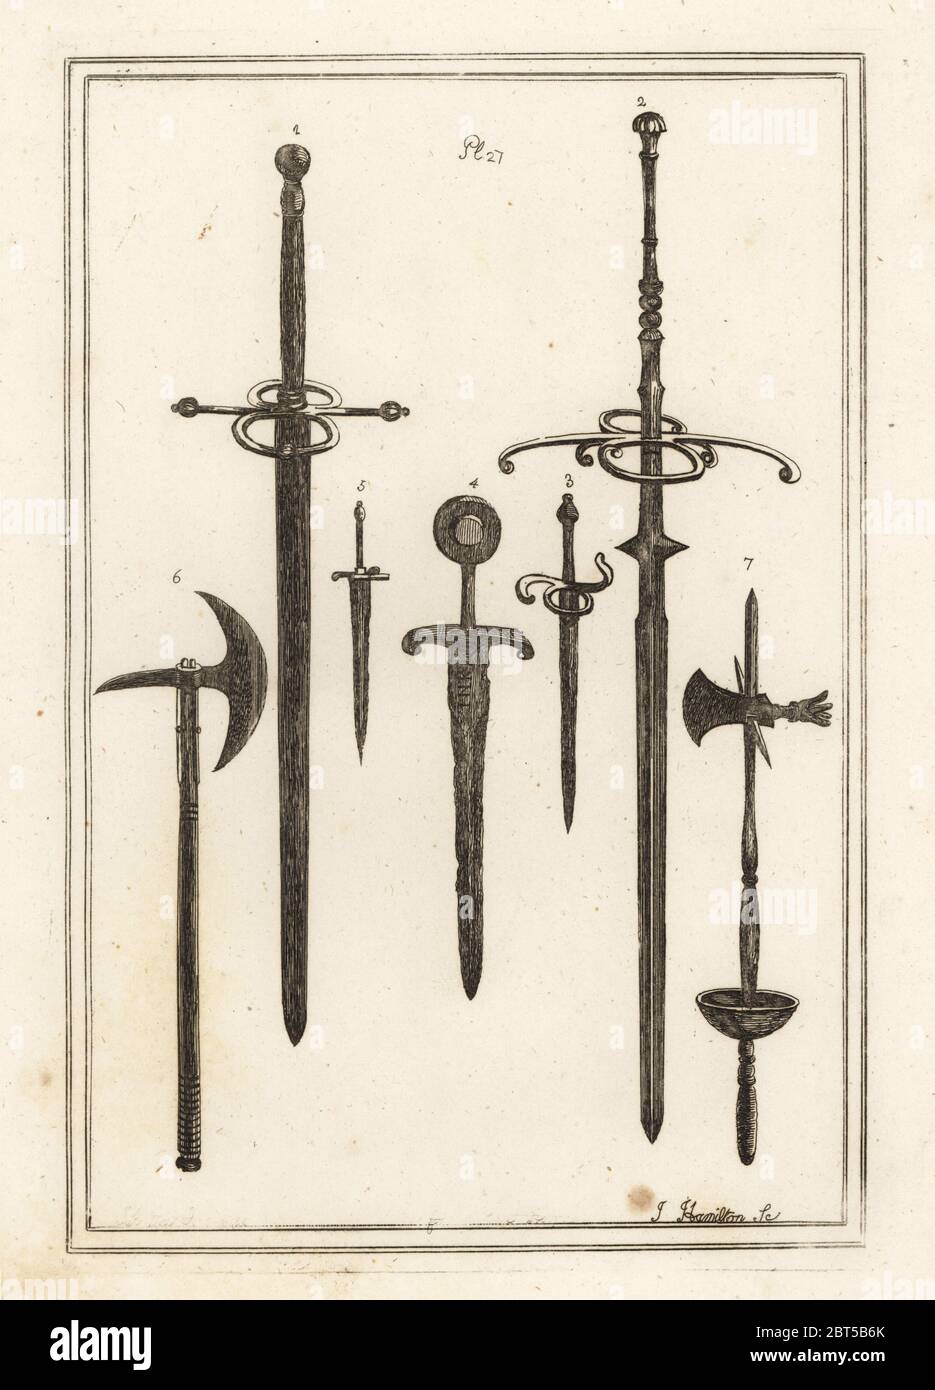 Ancient two-handed sword 1,2, dagger 3, sword and dagger from the knights of St. John of Jerusalem, Sutton at Hone 4,5, battle-axe 6,7. Copperplate engraving from Francis Grose's Military Antiquities respecting a History of the English Army, Stockdale, London, 1812. Stock Photo